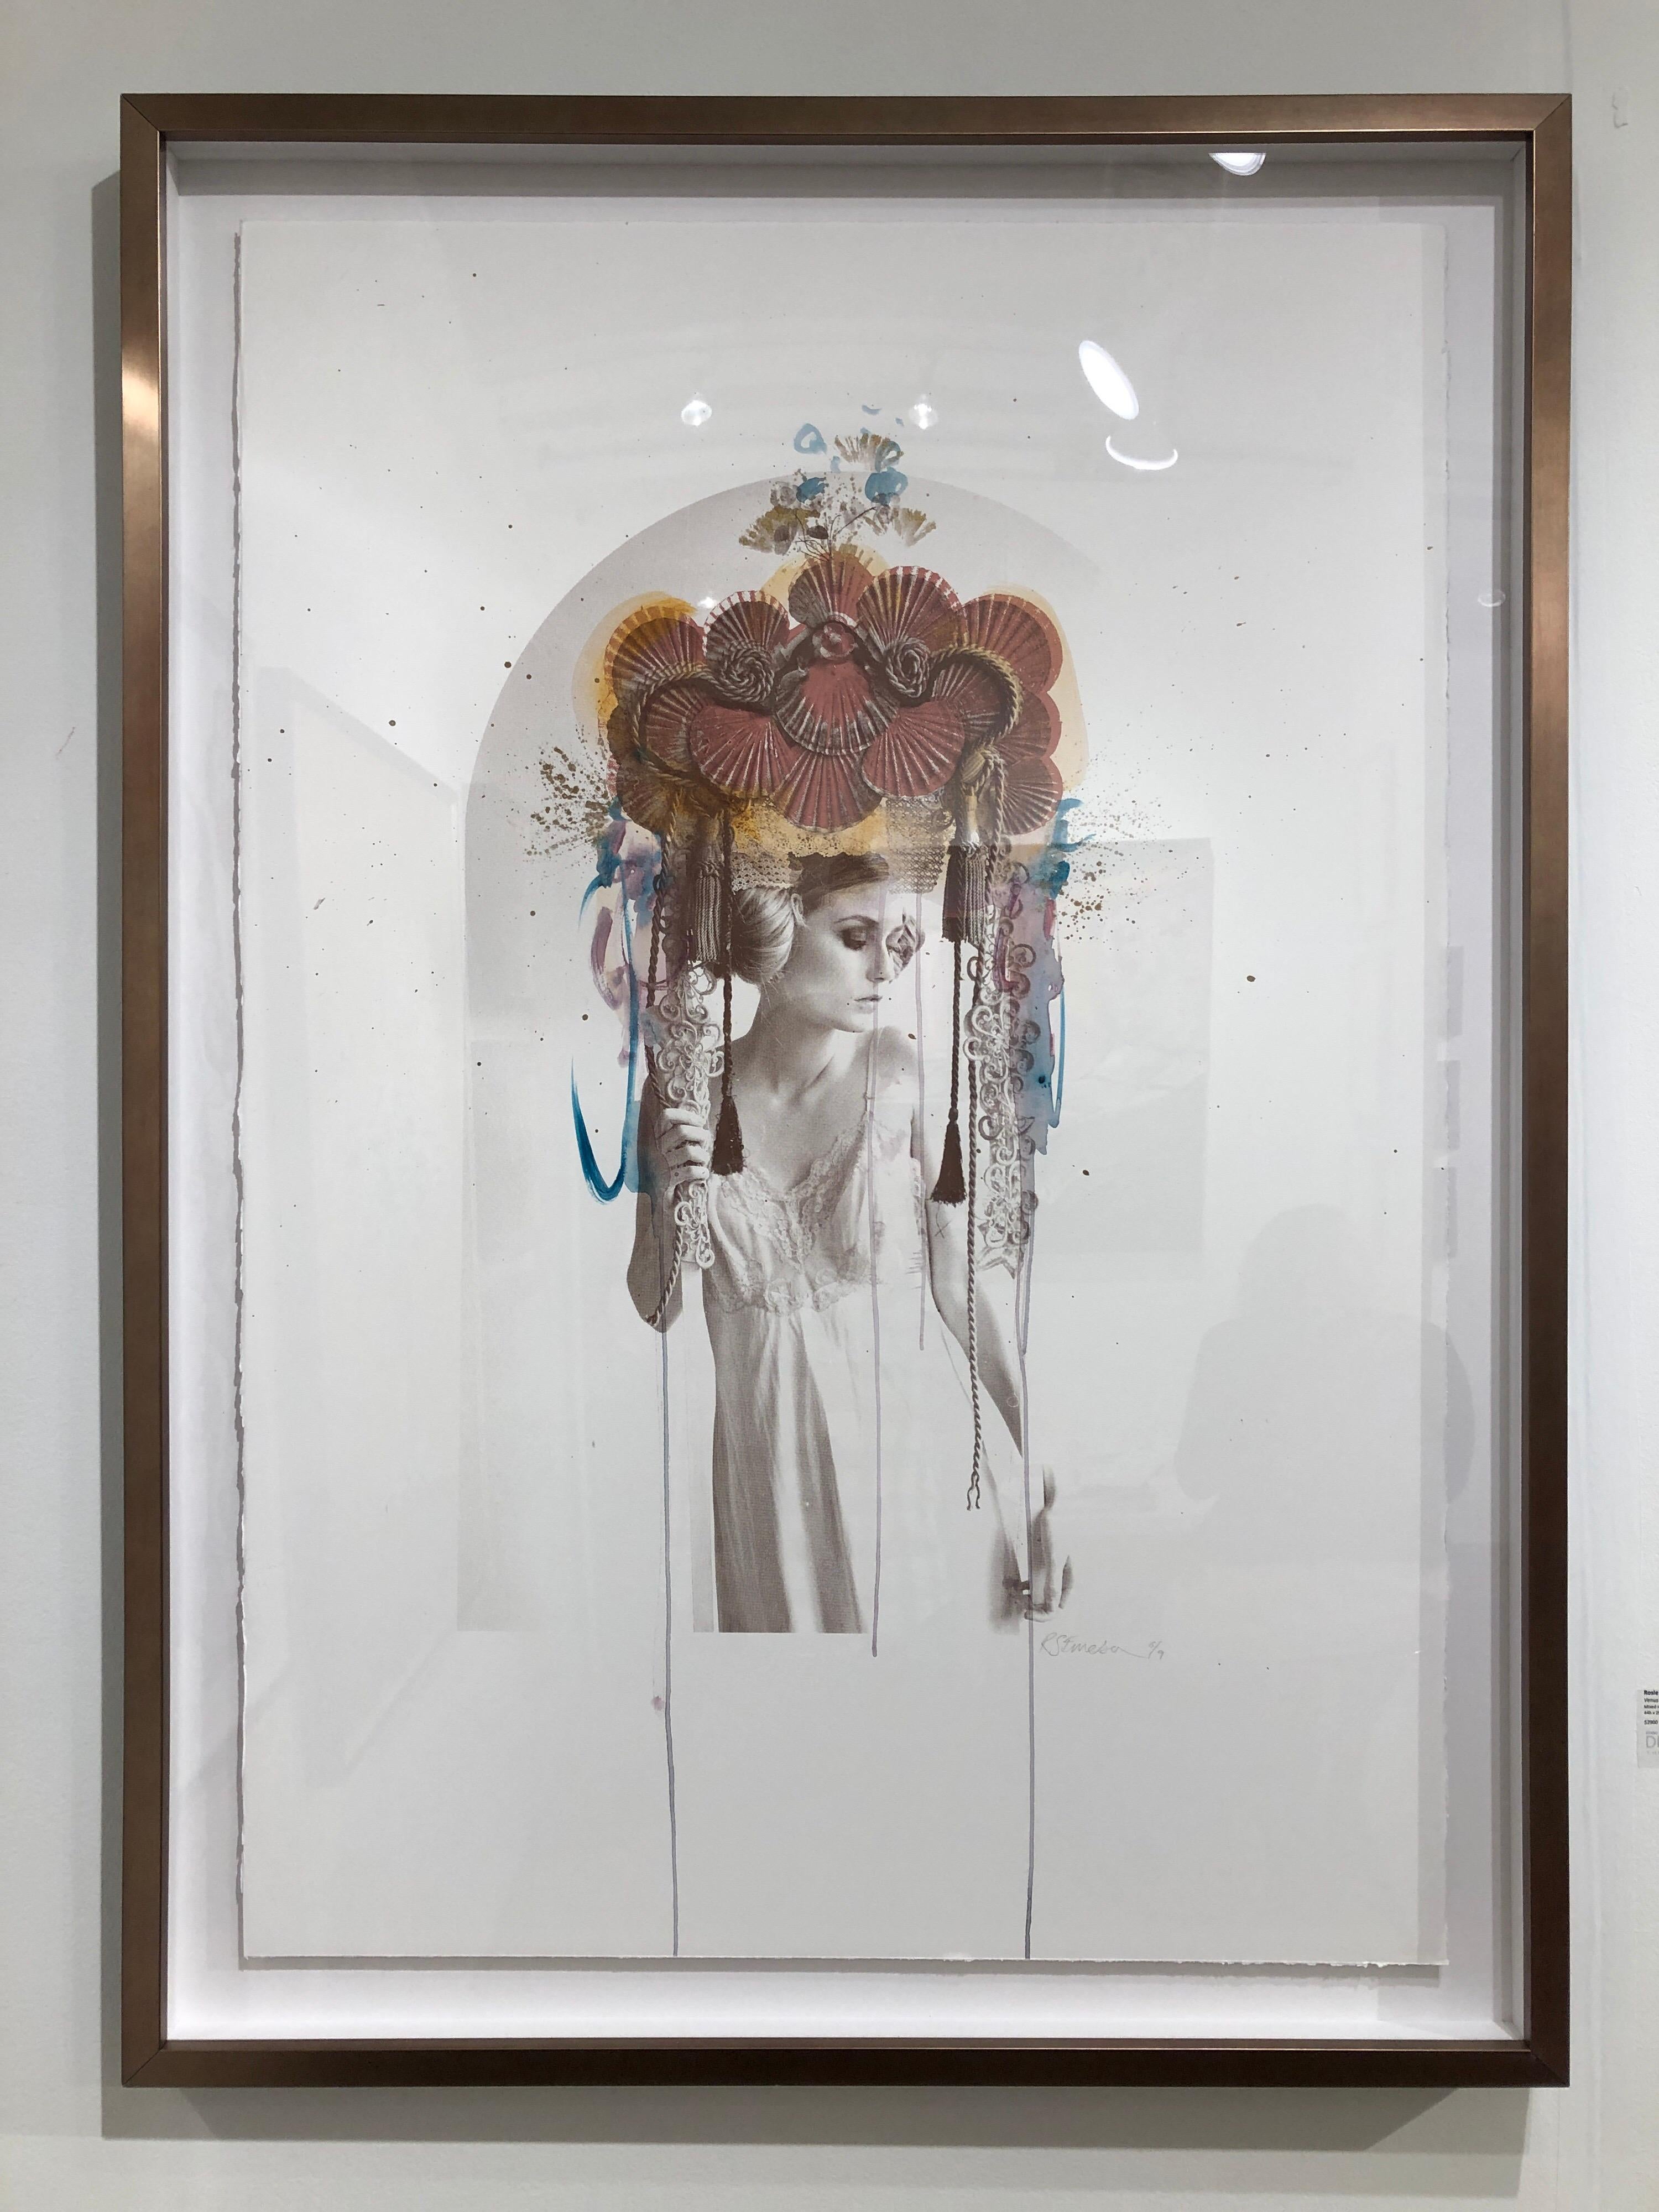 This piece is sold with a custom wood copper finish box frame, perfect for a contemporary setting.

This gorgeous artwork on paper was created initially with a screen print base of the model, then Rosie hand finishes the work with a unique splash